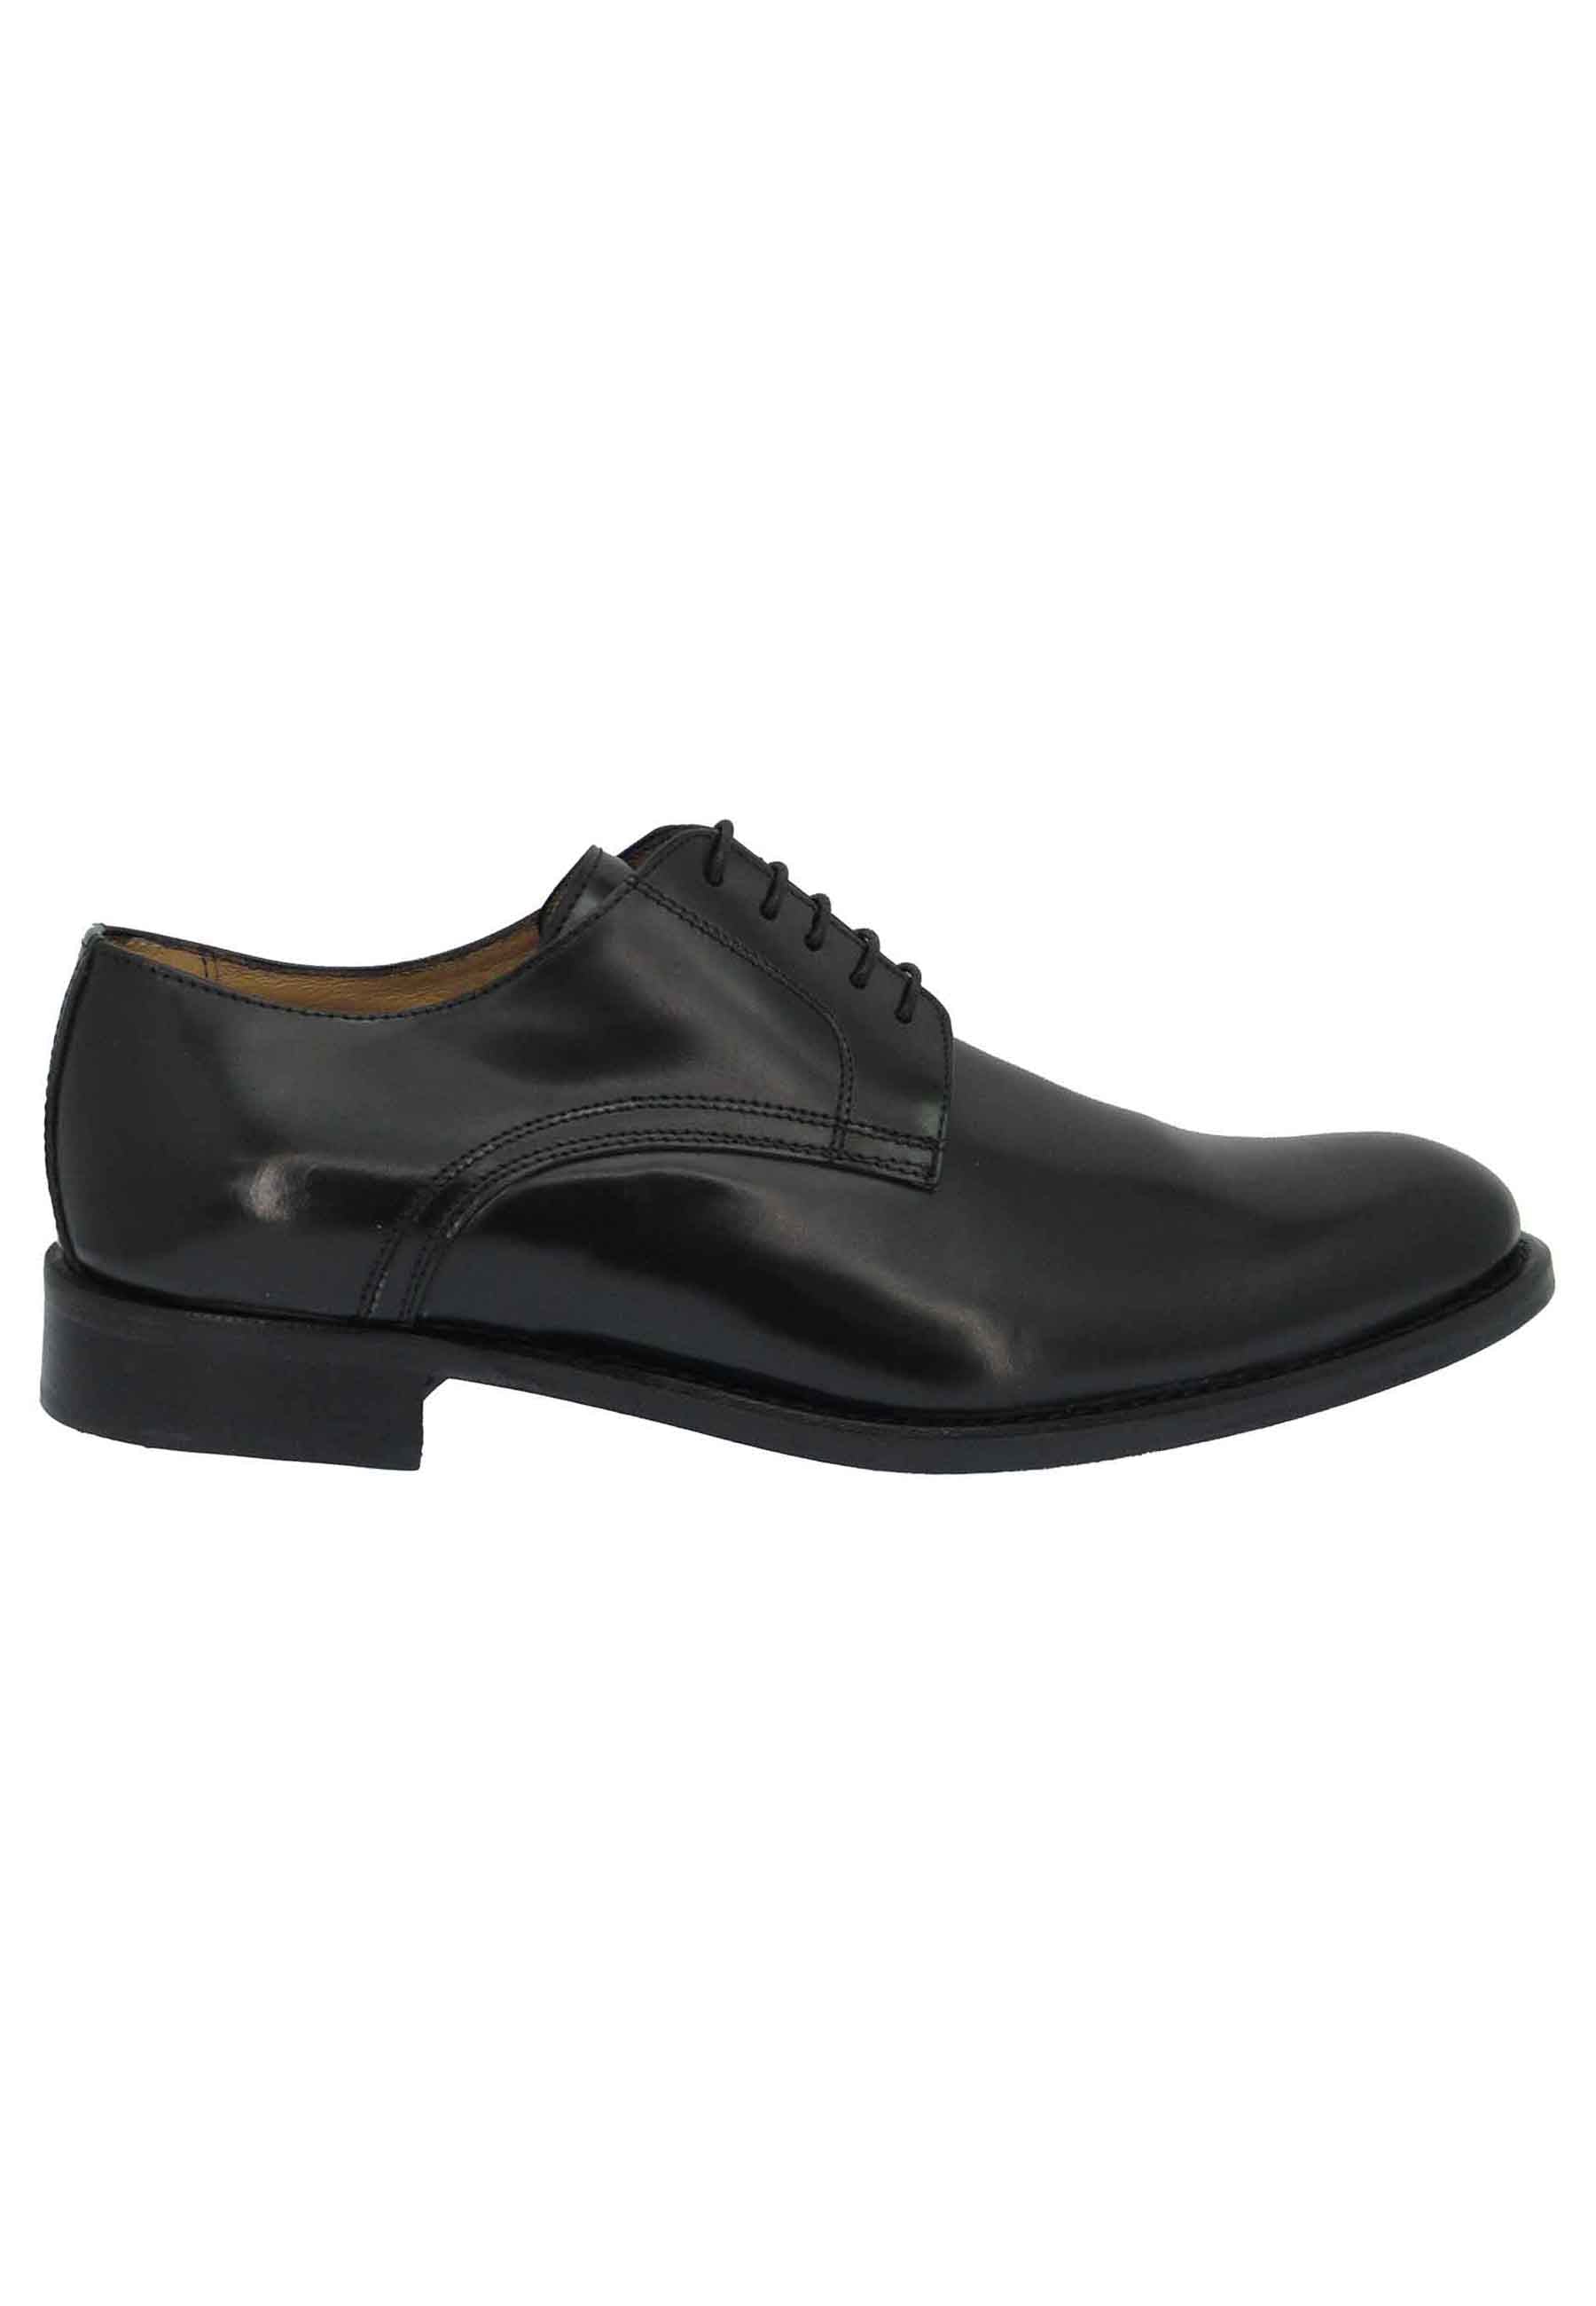 Men's lace-up shoes in lucina black leather with leather sole and heel